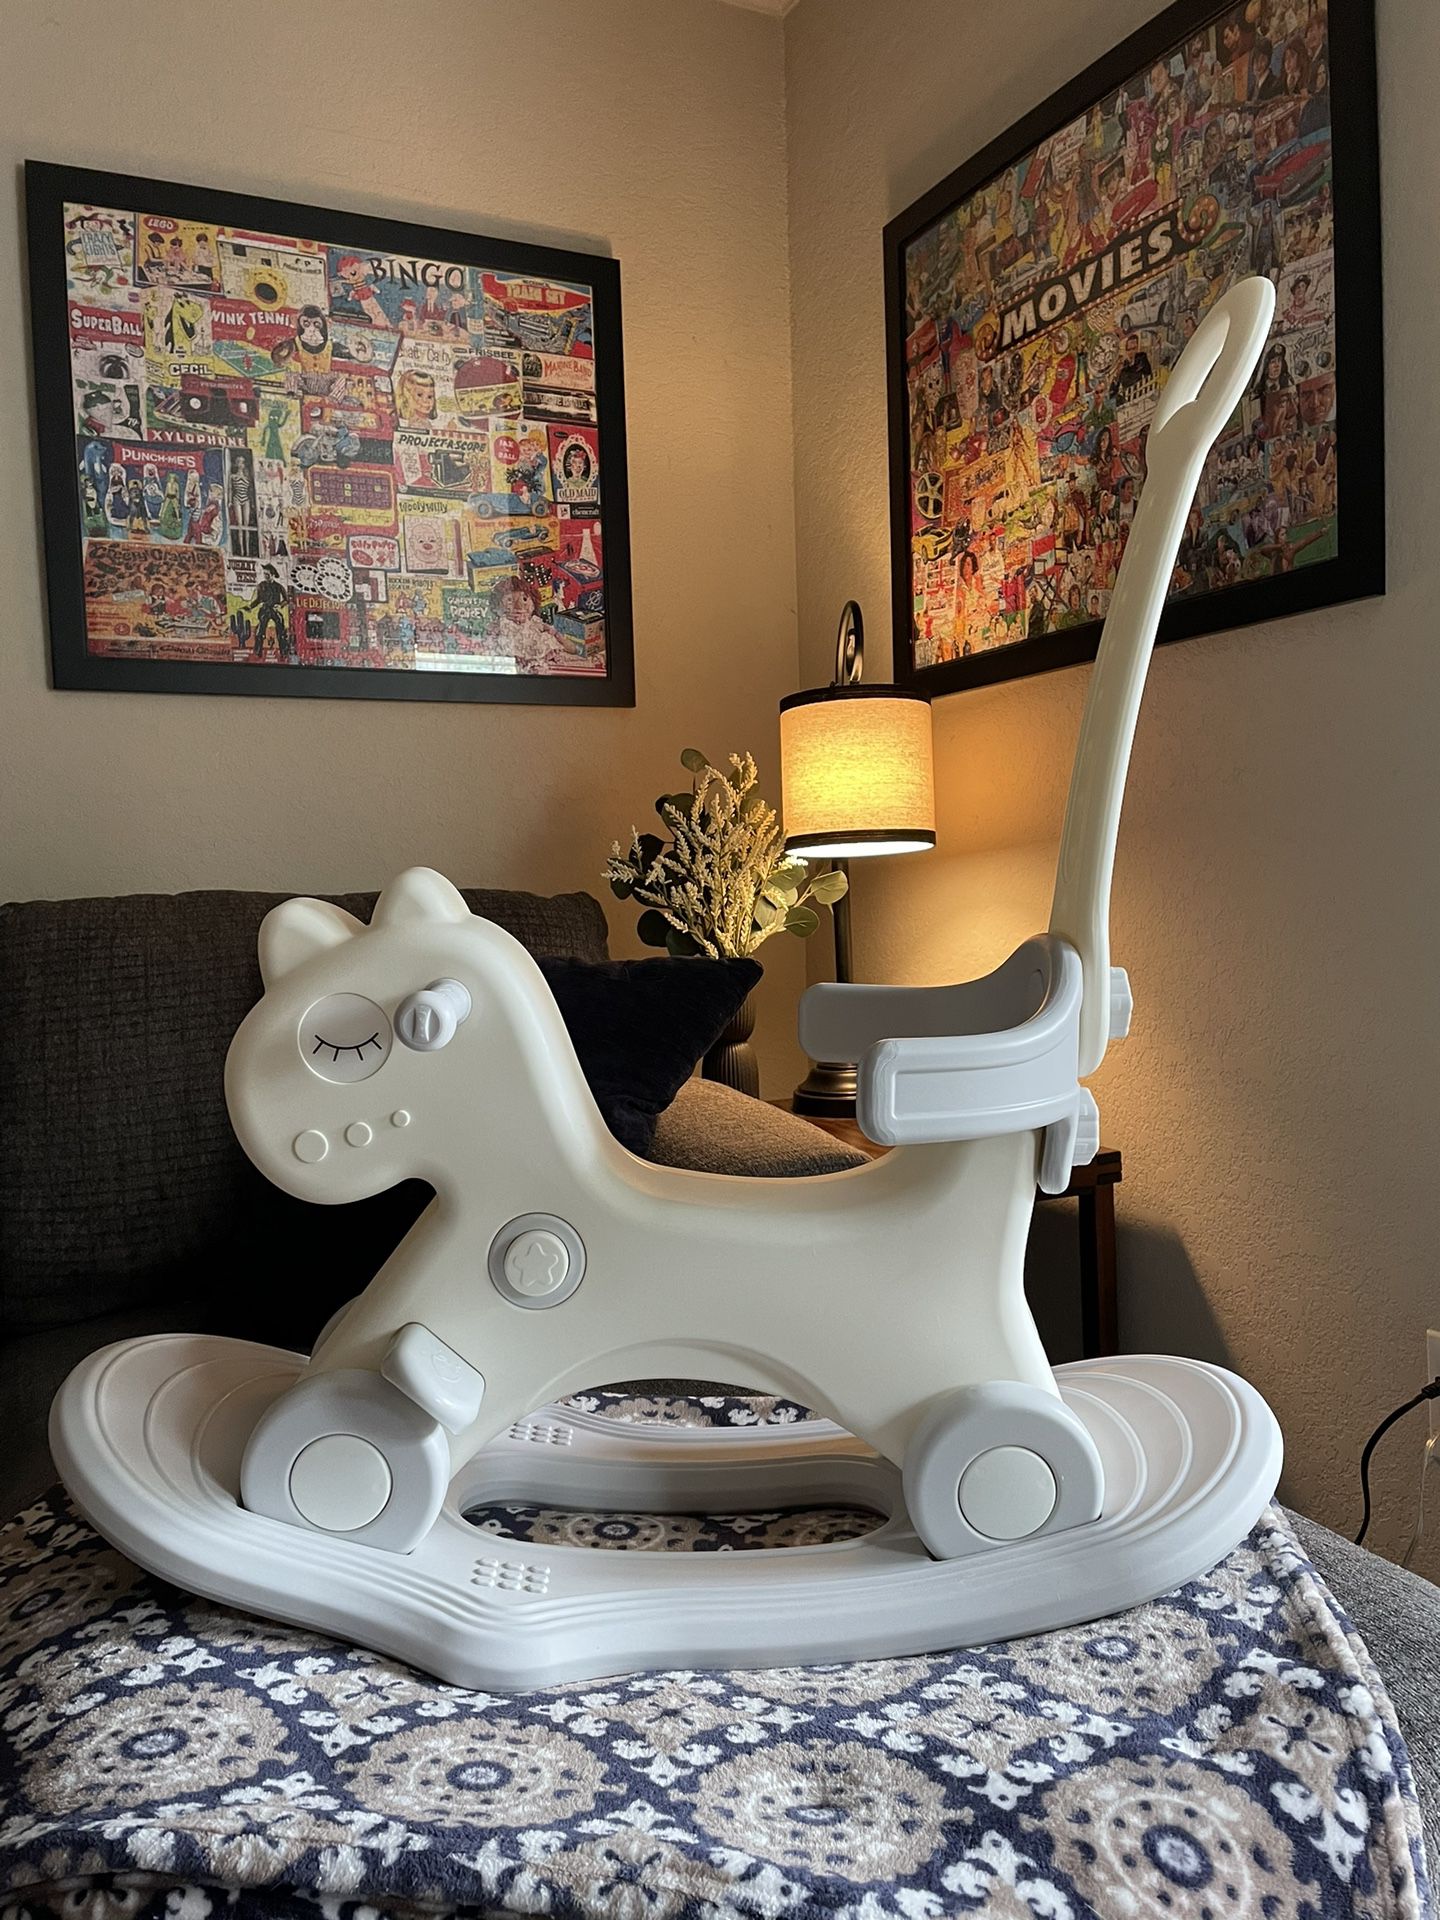 New 4 in 1 rocking horse ride on baby toddler toy. Check my other listings for more great items.